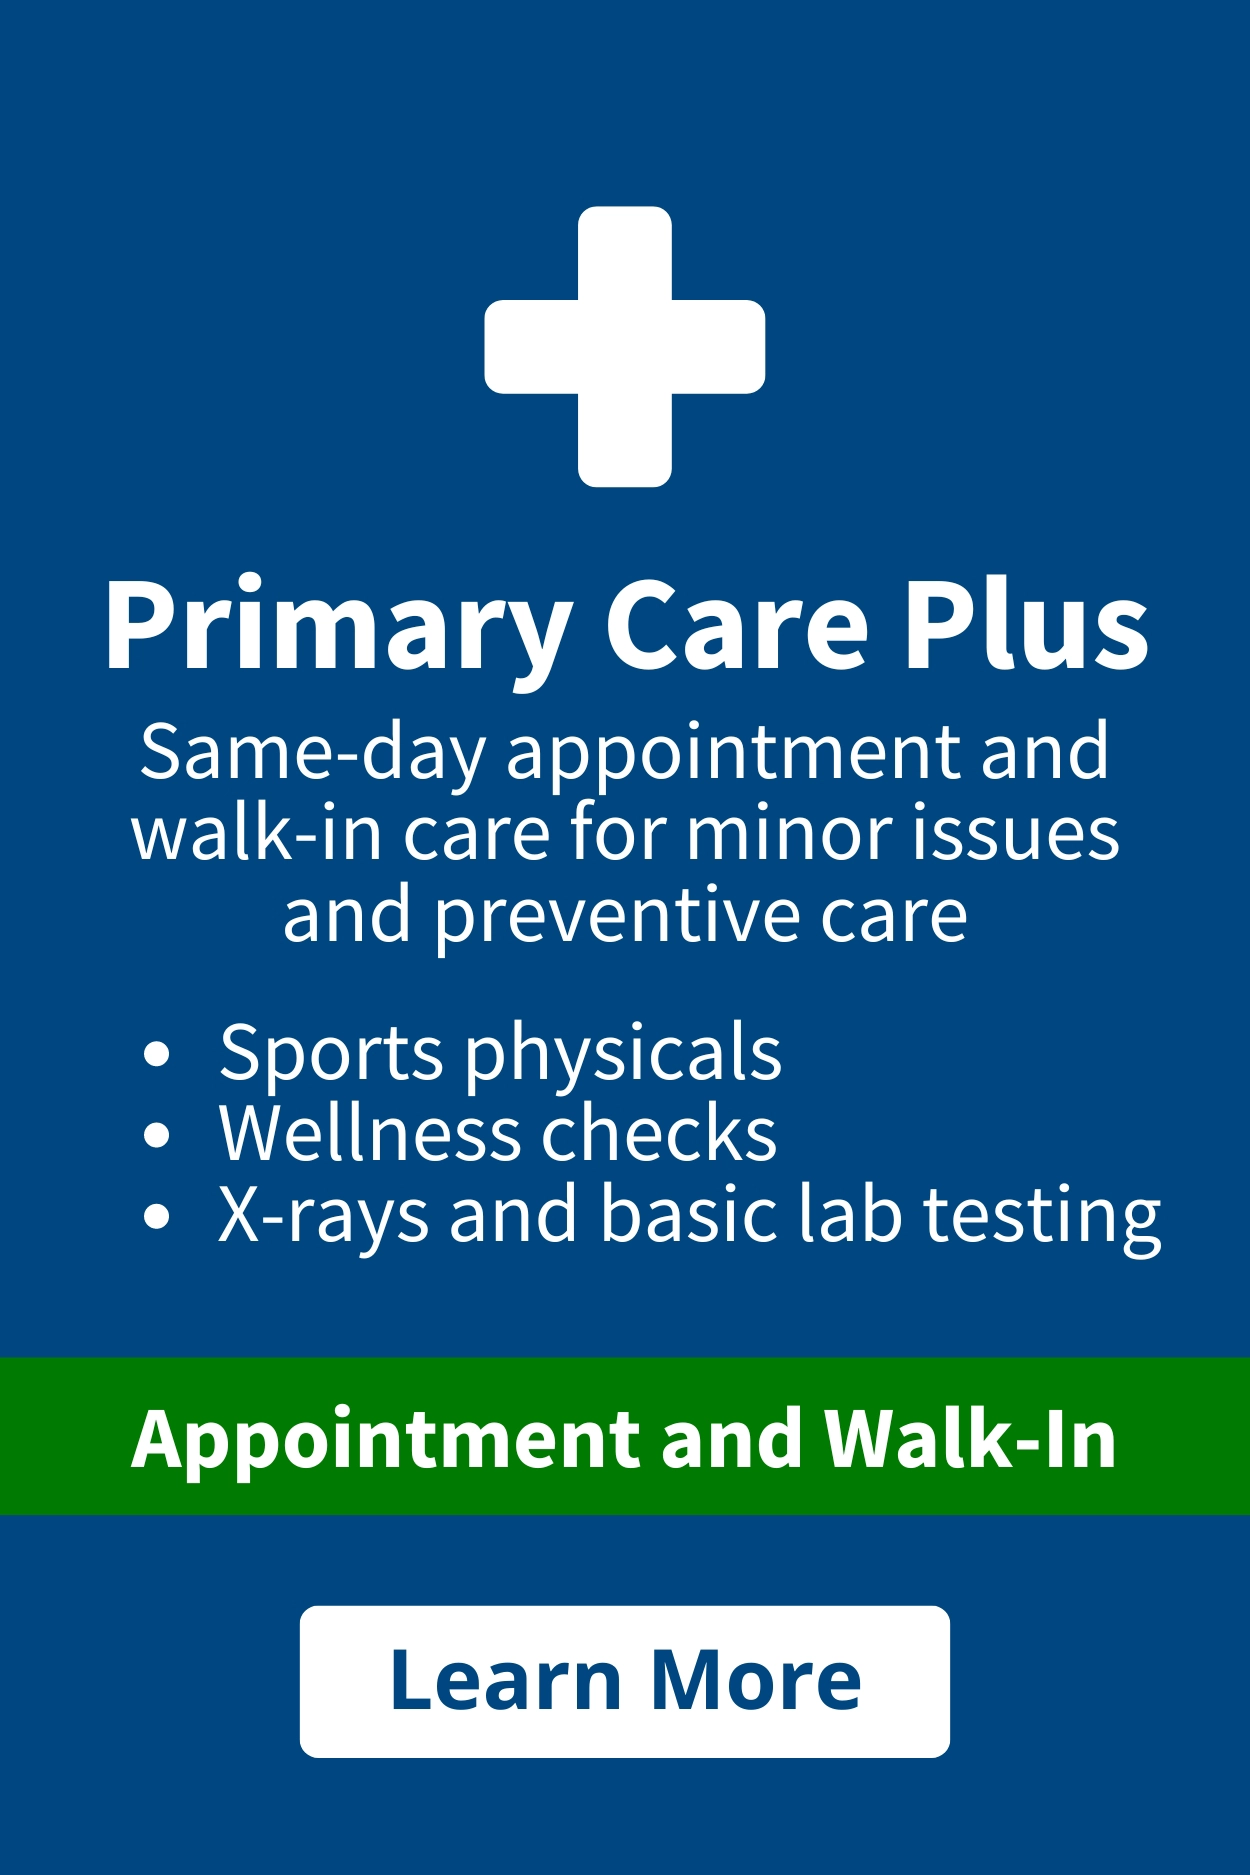 Blue graphic with text reading "Primary Care Plus. Same day appointments and walk-in care for minor issues and preventive care." Bullet points read: "Sports physicals, wellness checks, x-rays and basic lab testing." Light blue bar reads "Appointments and Walk-In." Button reads "Learn More"